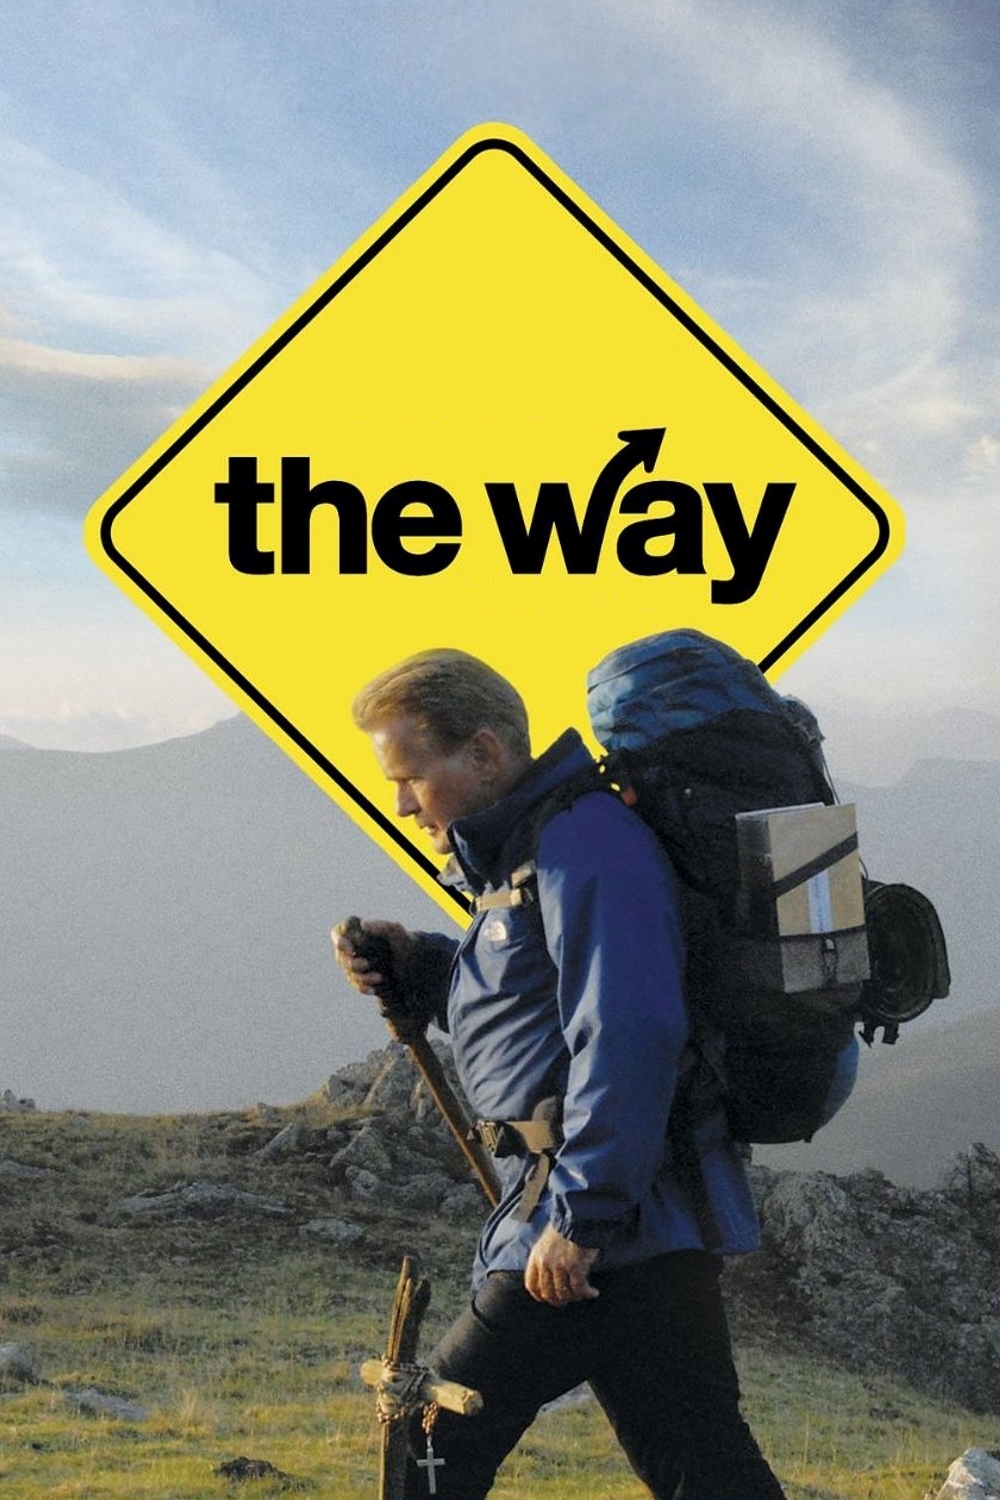 Poster for the movie "The Way"